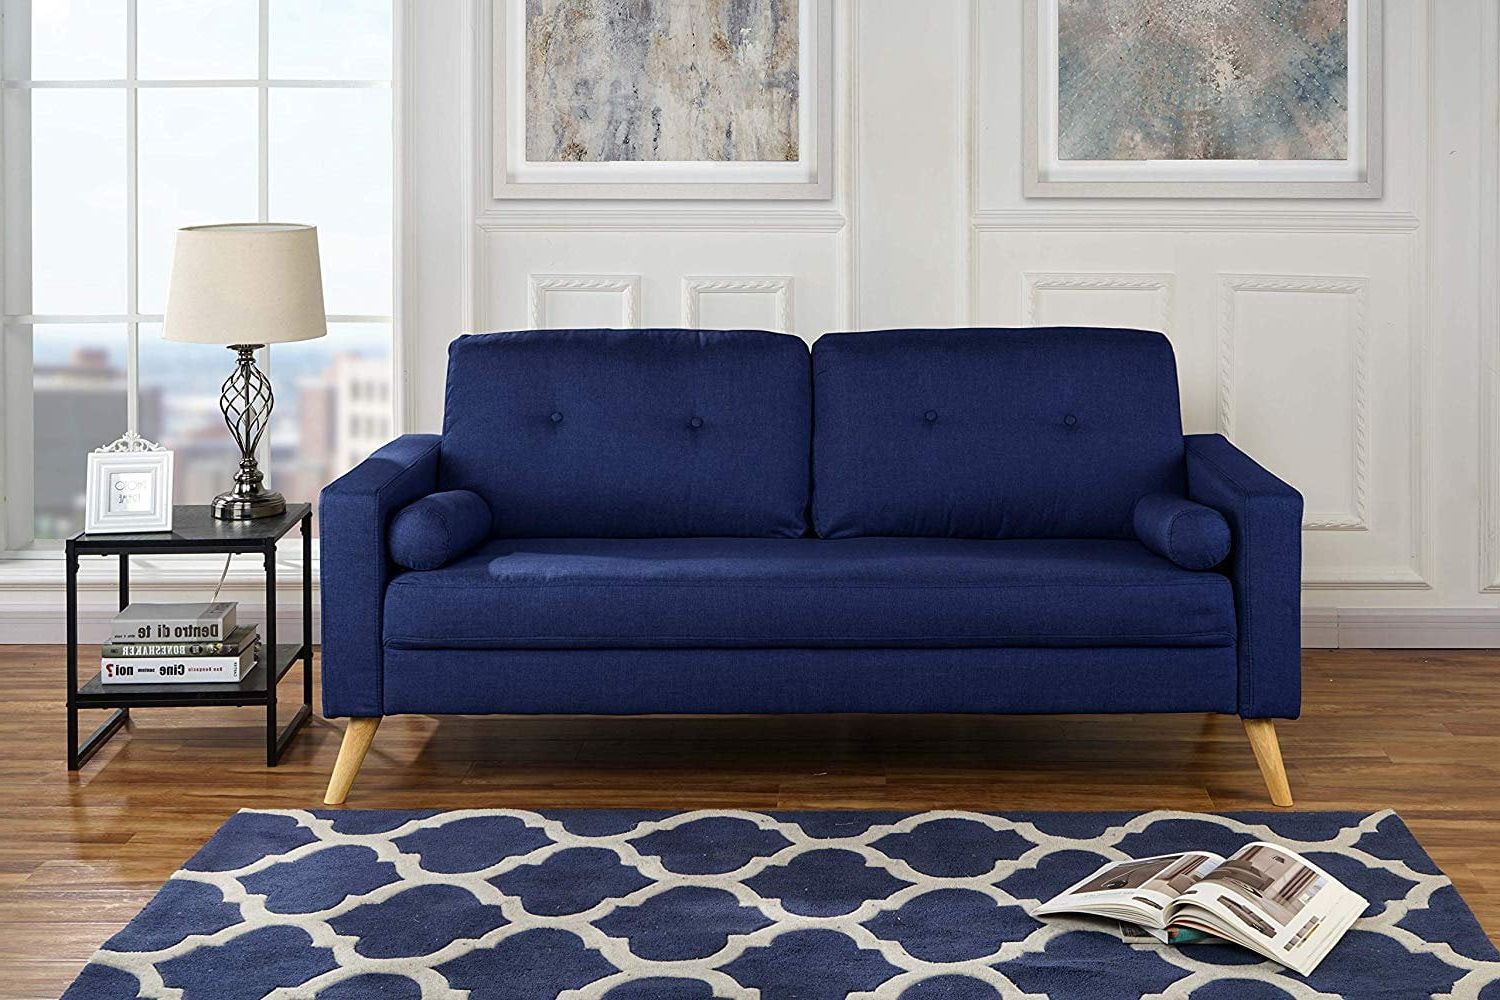 Modern Living Room Fabric Sofa, Couch With Tufted Buttons (dark Blue Regarding Sofas In Blue (View 6 of 20)